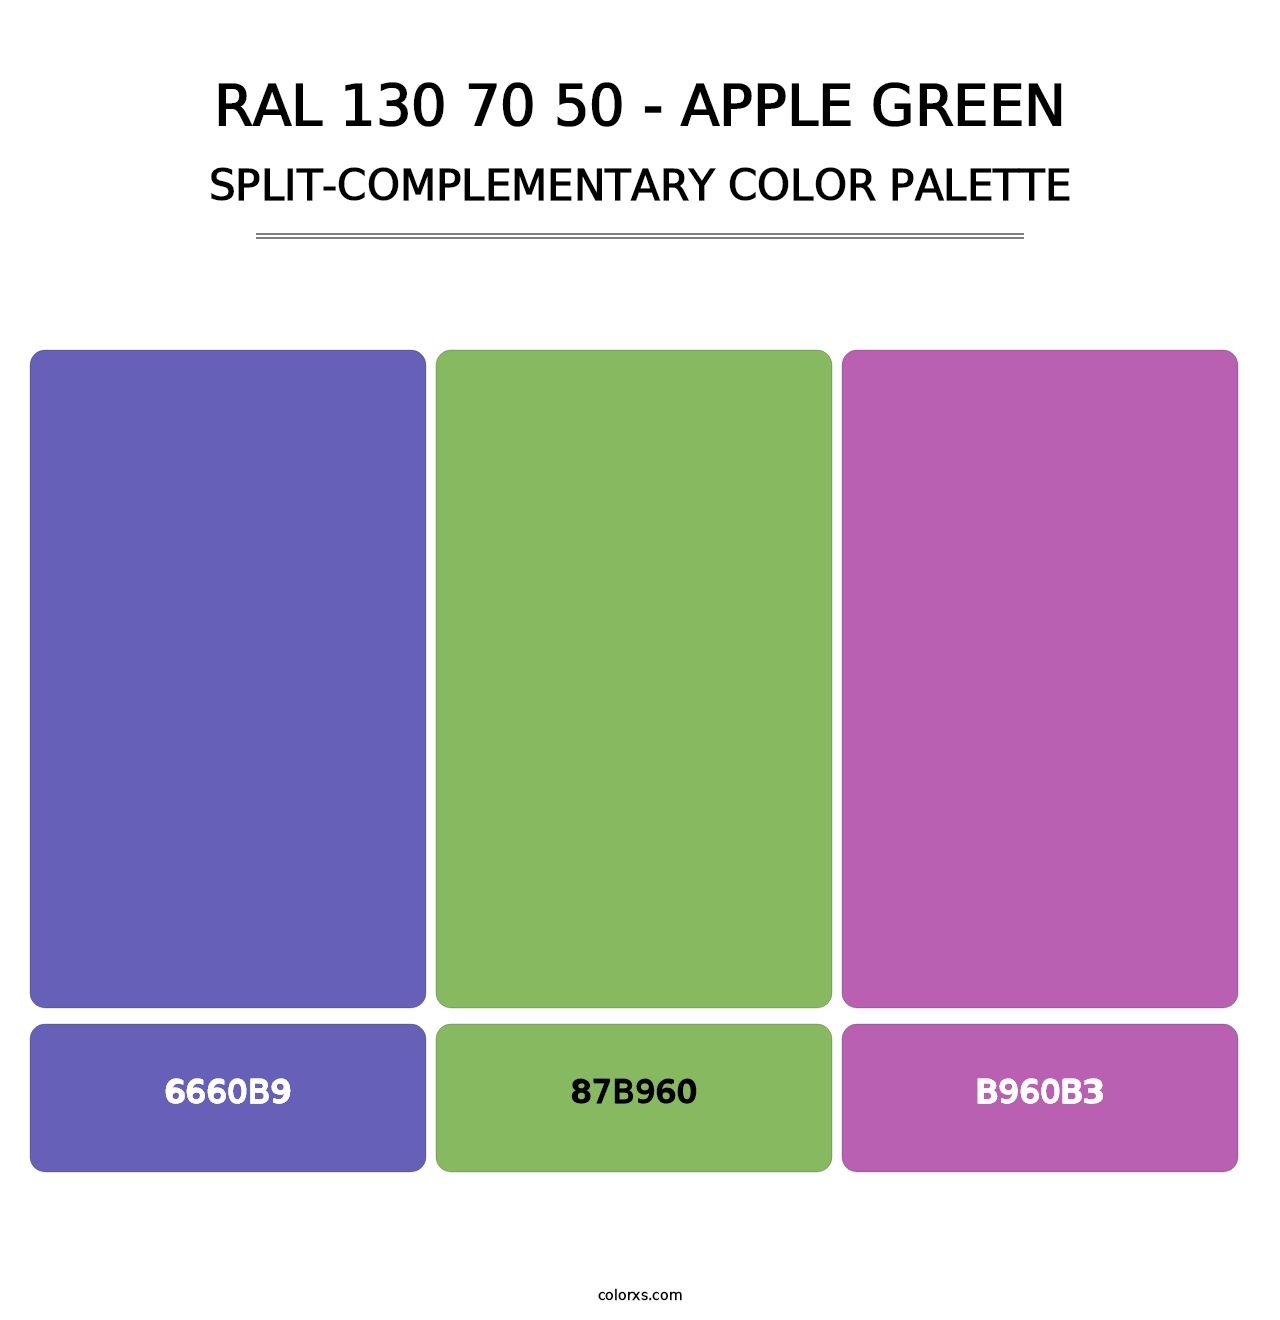 RAL 130 70 50 - Apple Green - Split-Complementary Color Palette